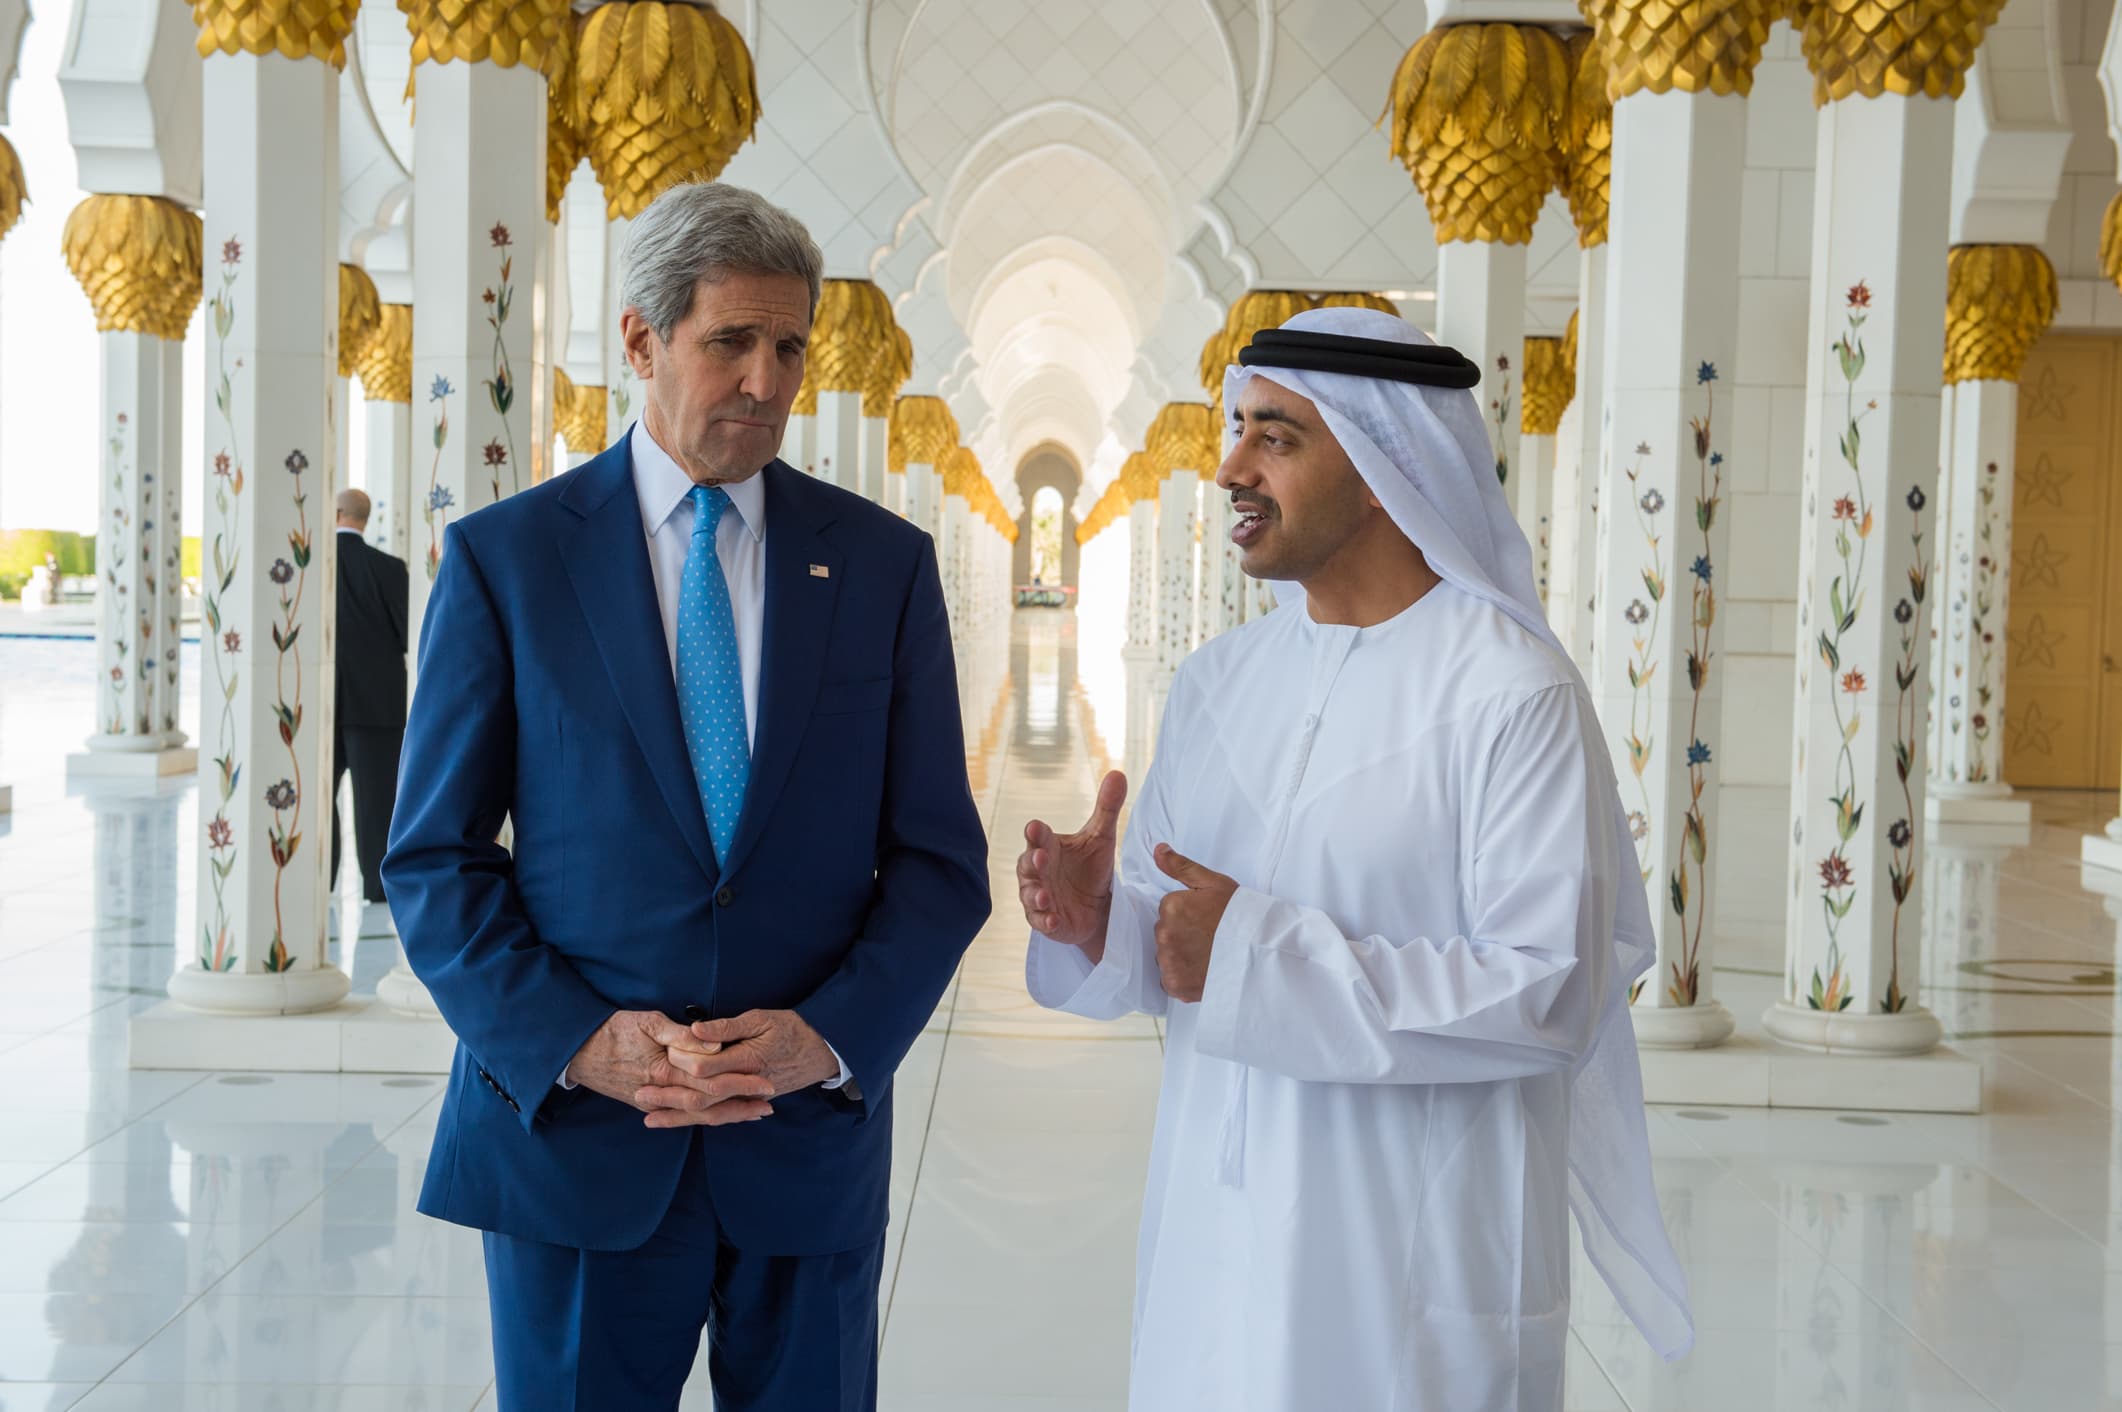 U.S. Secretary of State John Kerry during his visit to the United Arab Emirates toured the Sheikh Zayed Grand Mosque in Abu Dhabi with UAE Foreign Minister, His Highness Sheikh Abdullah bin Zayed Al Nahyan